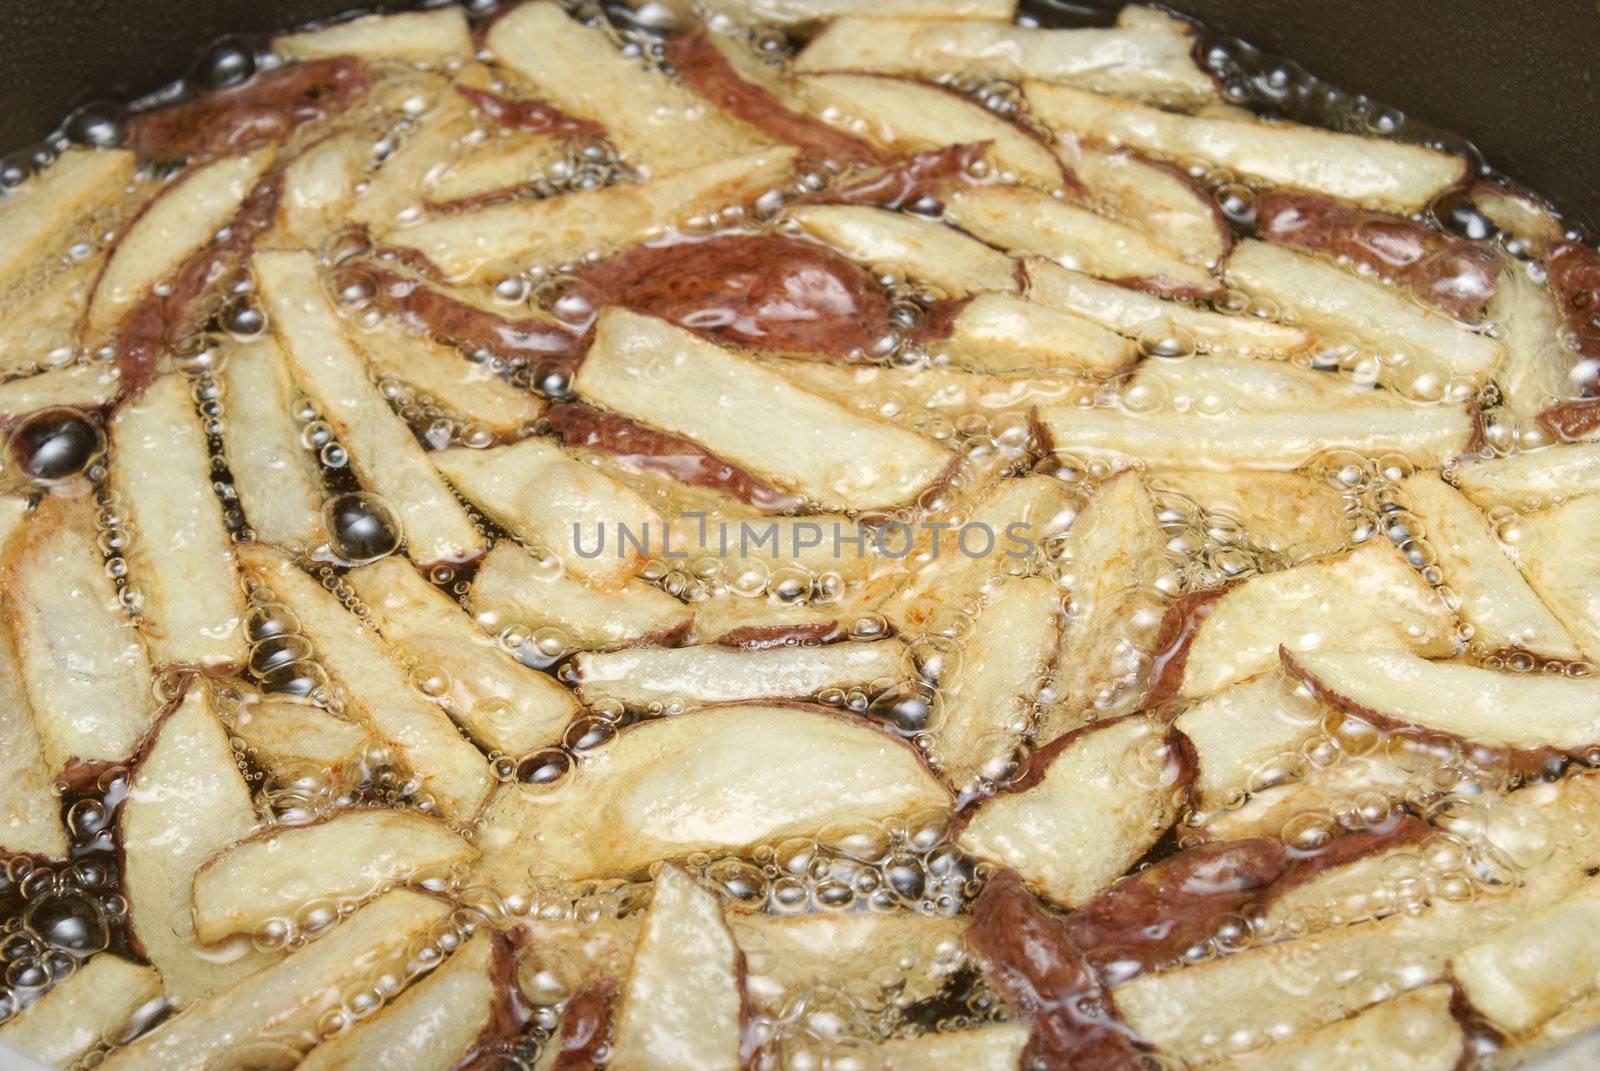 An order of french fries cooking in some oil.